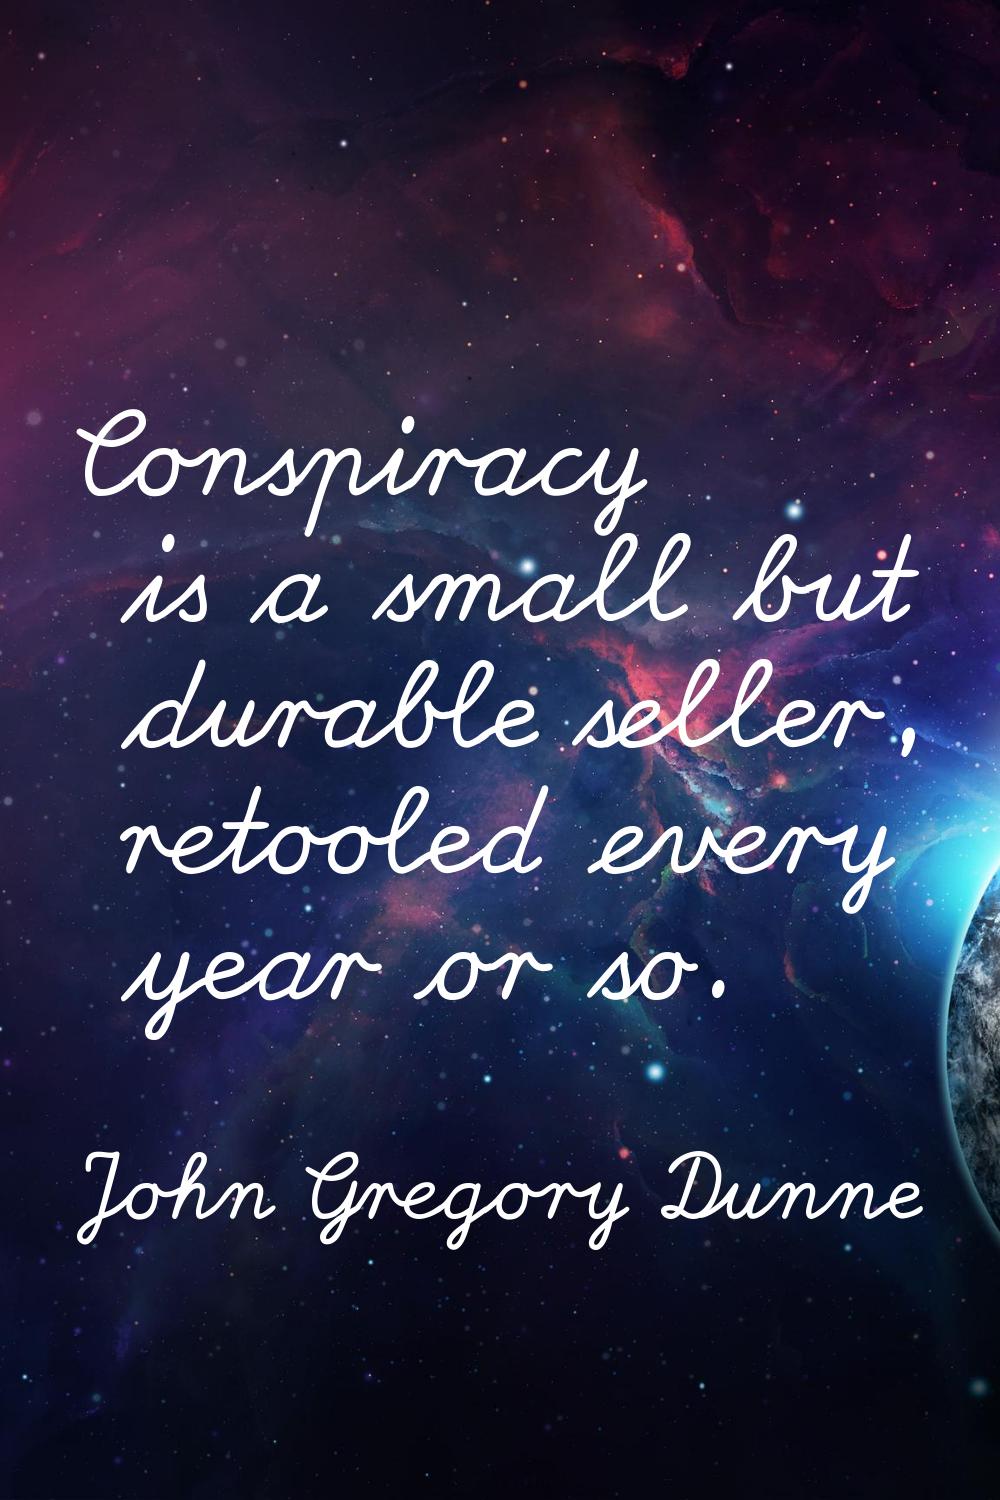 Conspiracy is a small but durable seller, retooled every year or so.